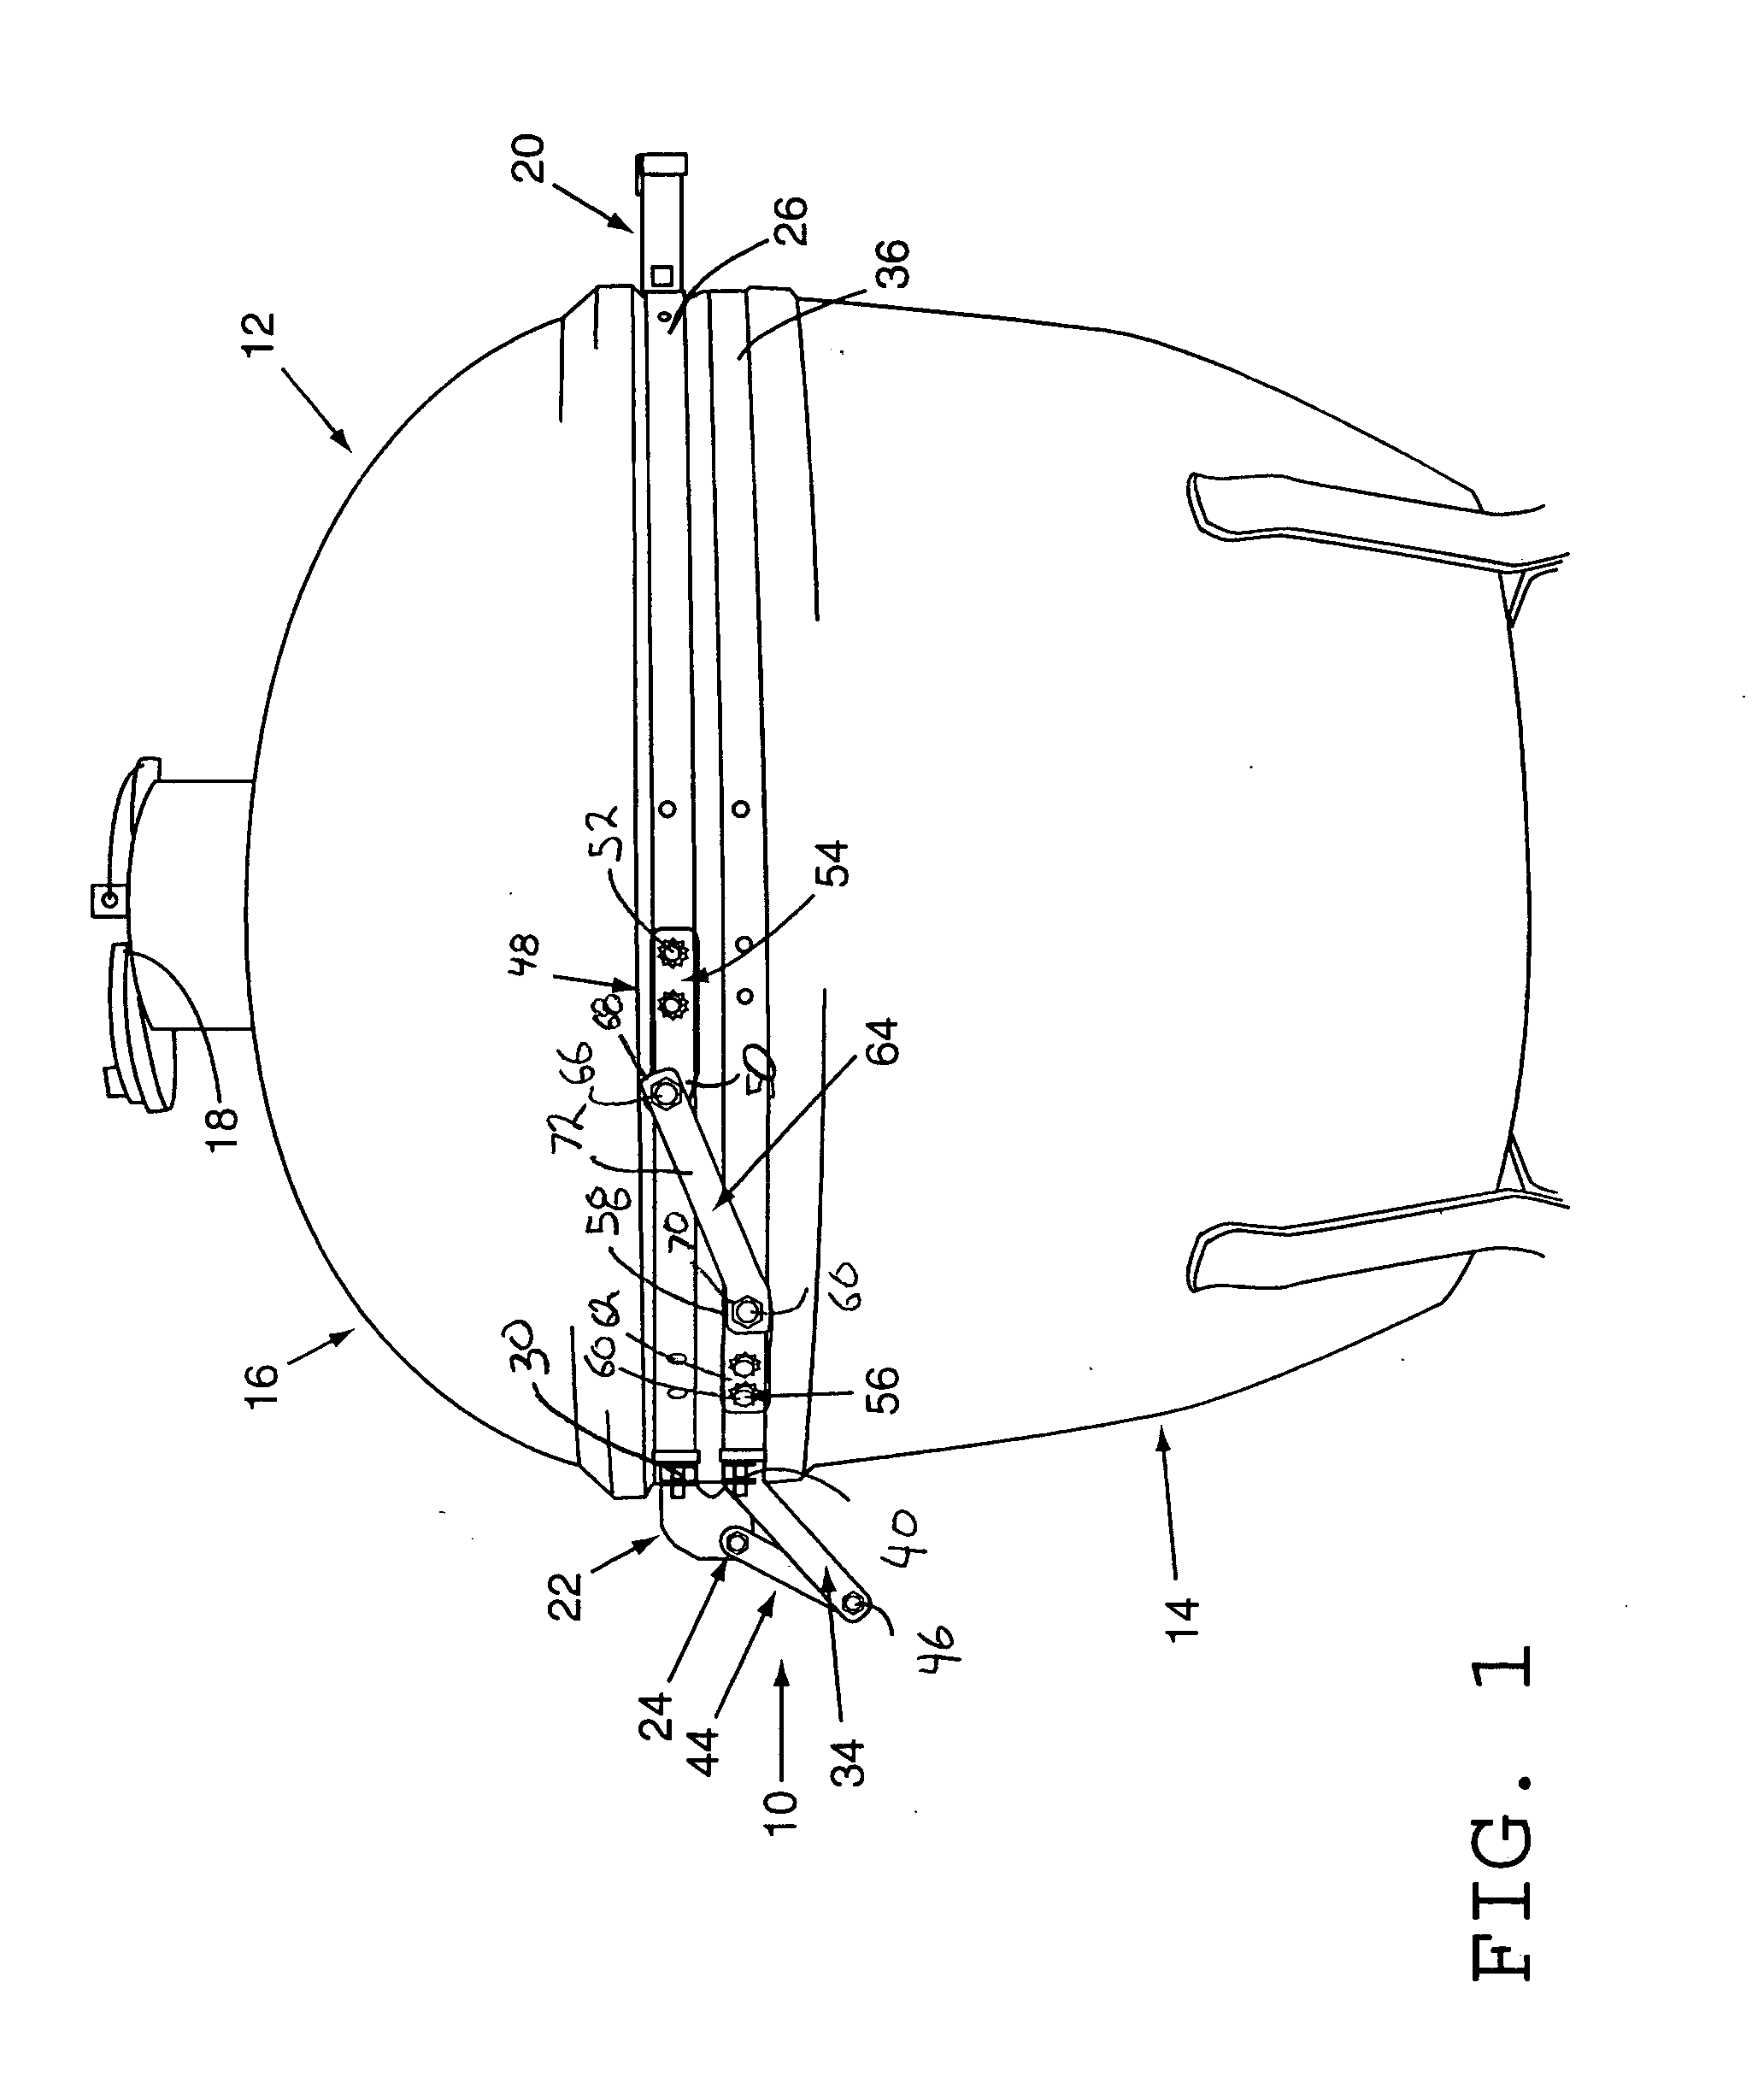 Hinge mechanism for barbeque grills and smokers